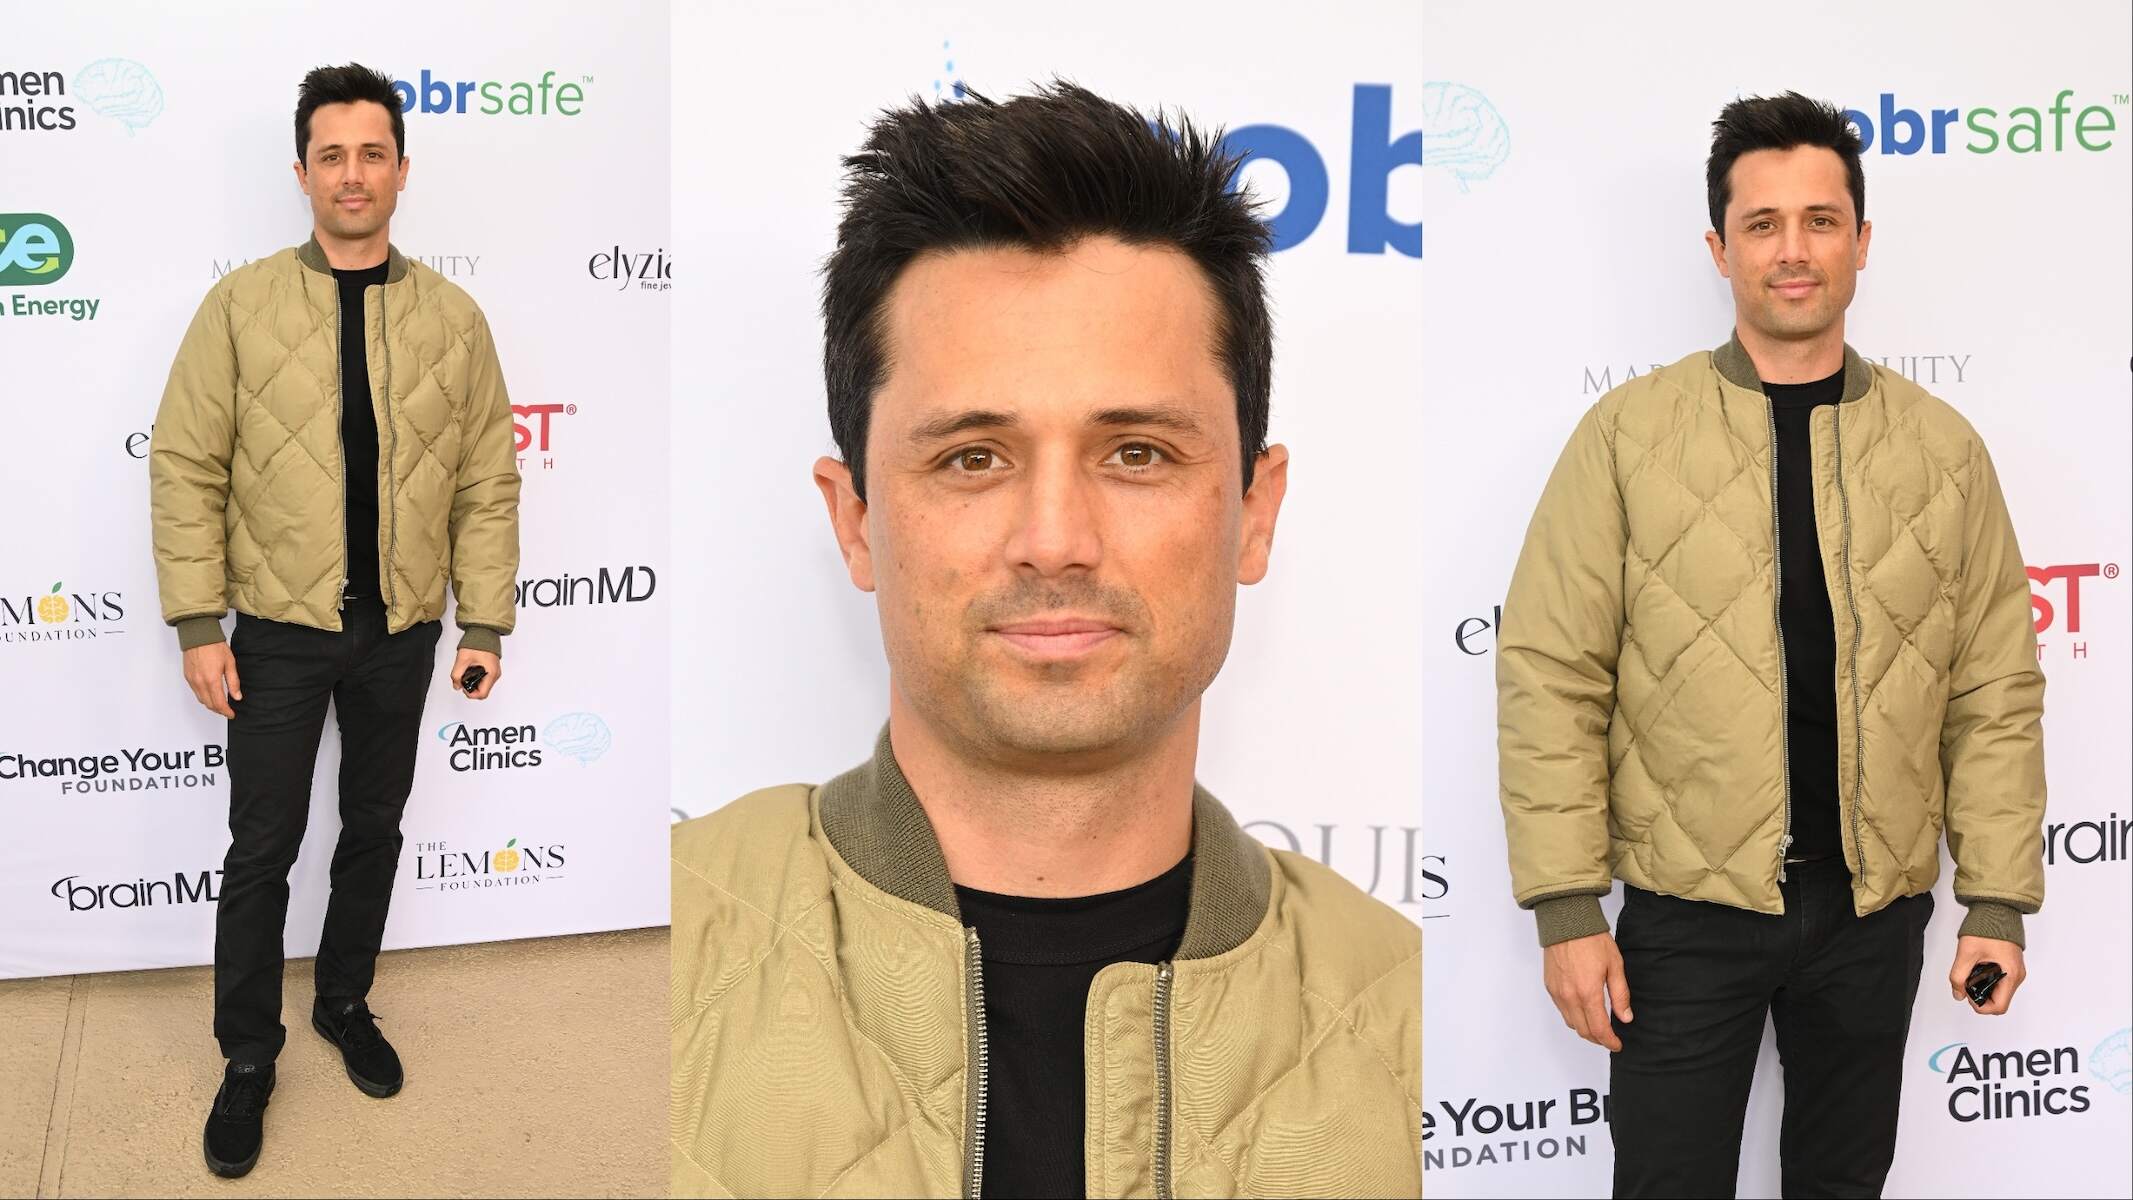 Wearing an olive quilted jacket and black pants, Stephen Colletti poses for photos at the charity pickleball tournament